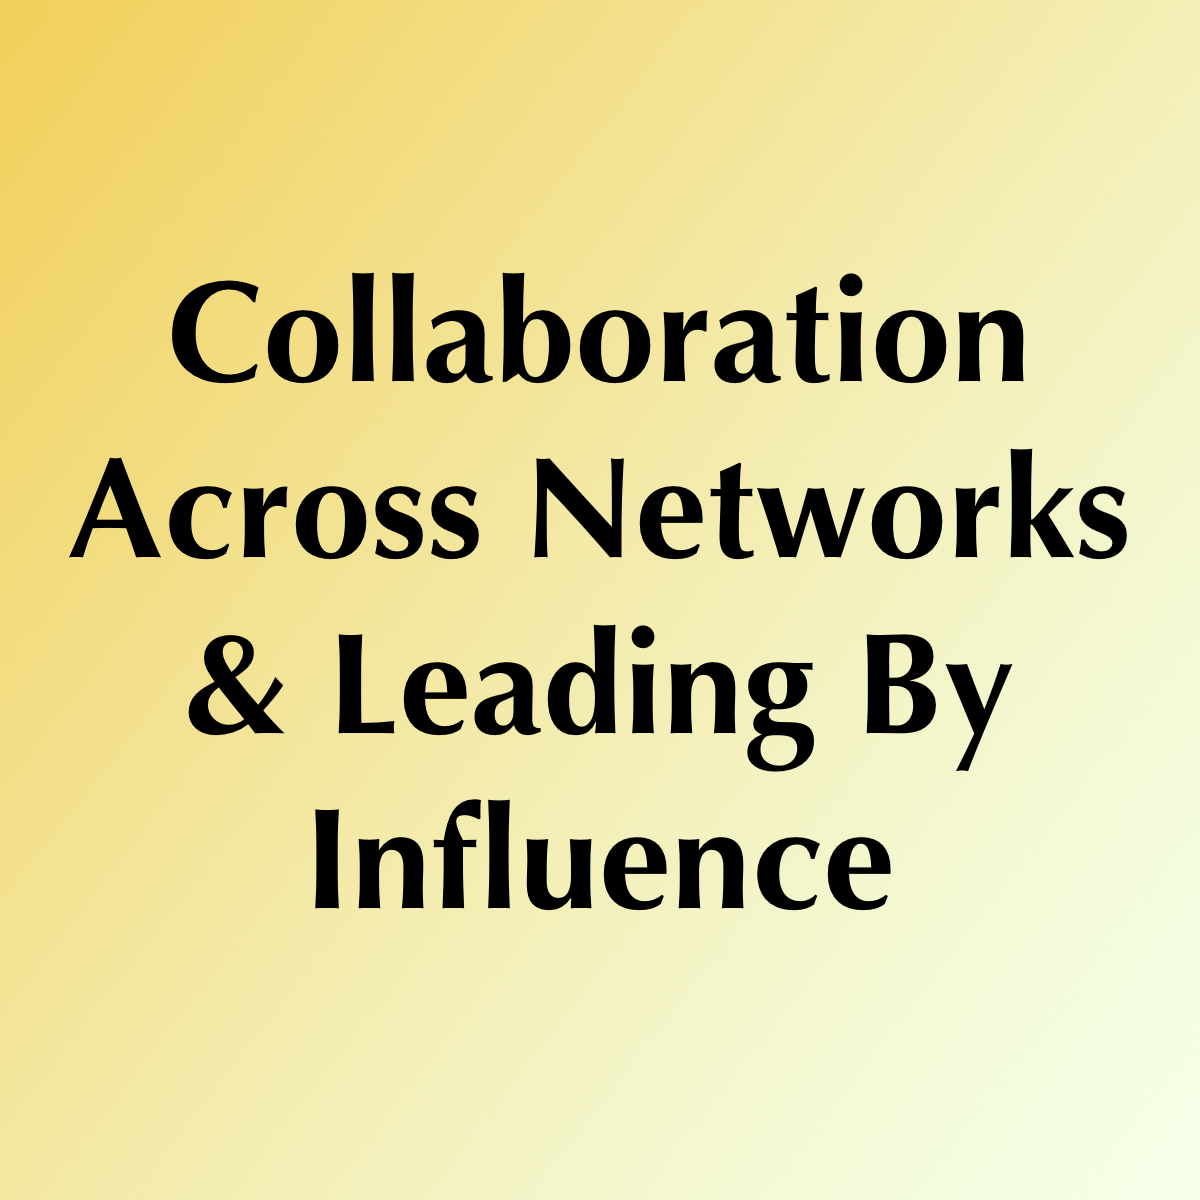 Collaboration Across Networks & Leading By Influence